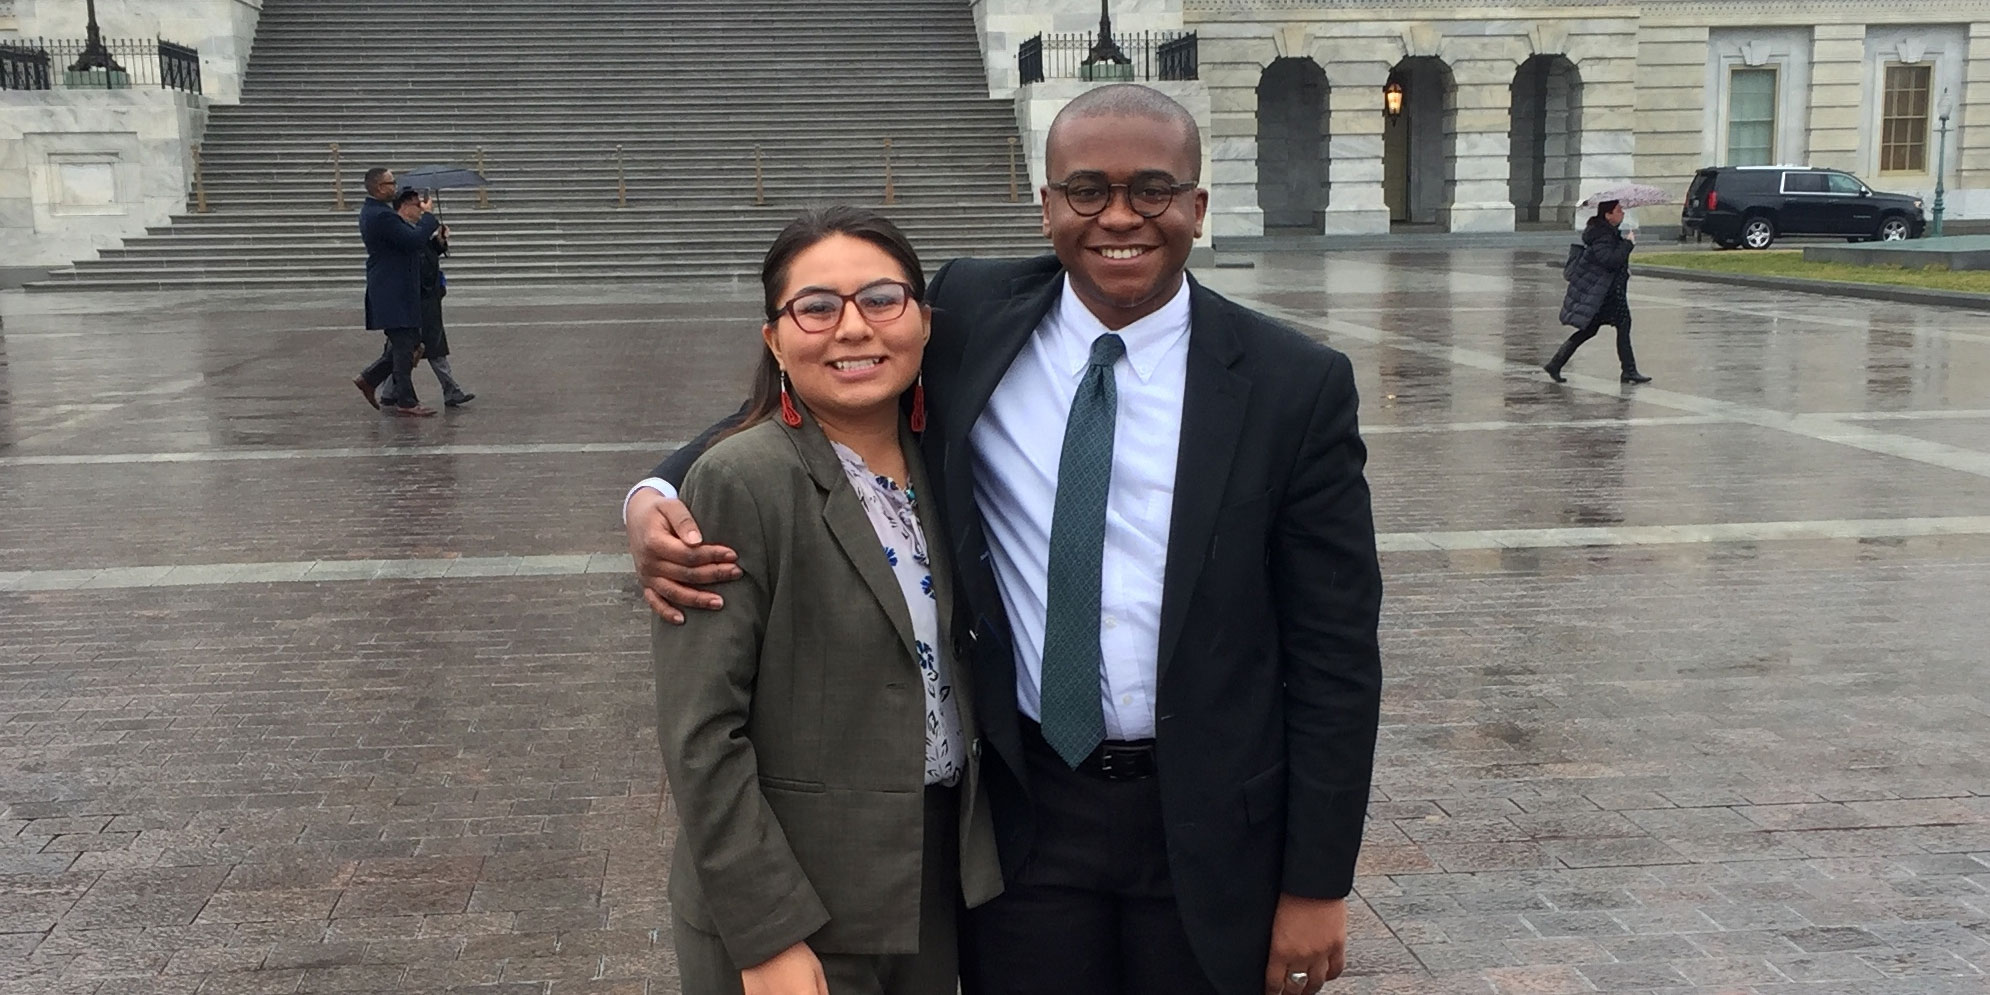 Two interns smiling and posing in front of the U.S Capitol Building on a rainy day.